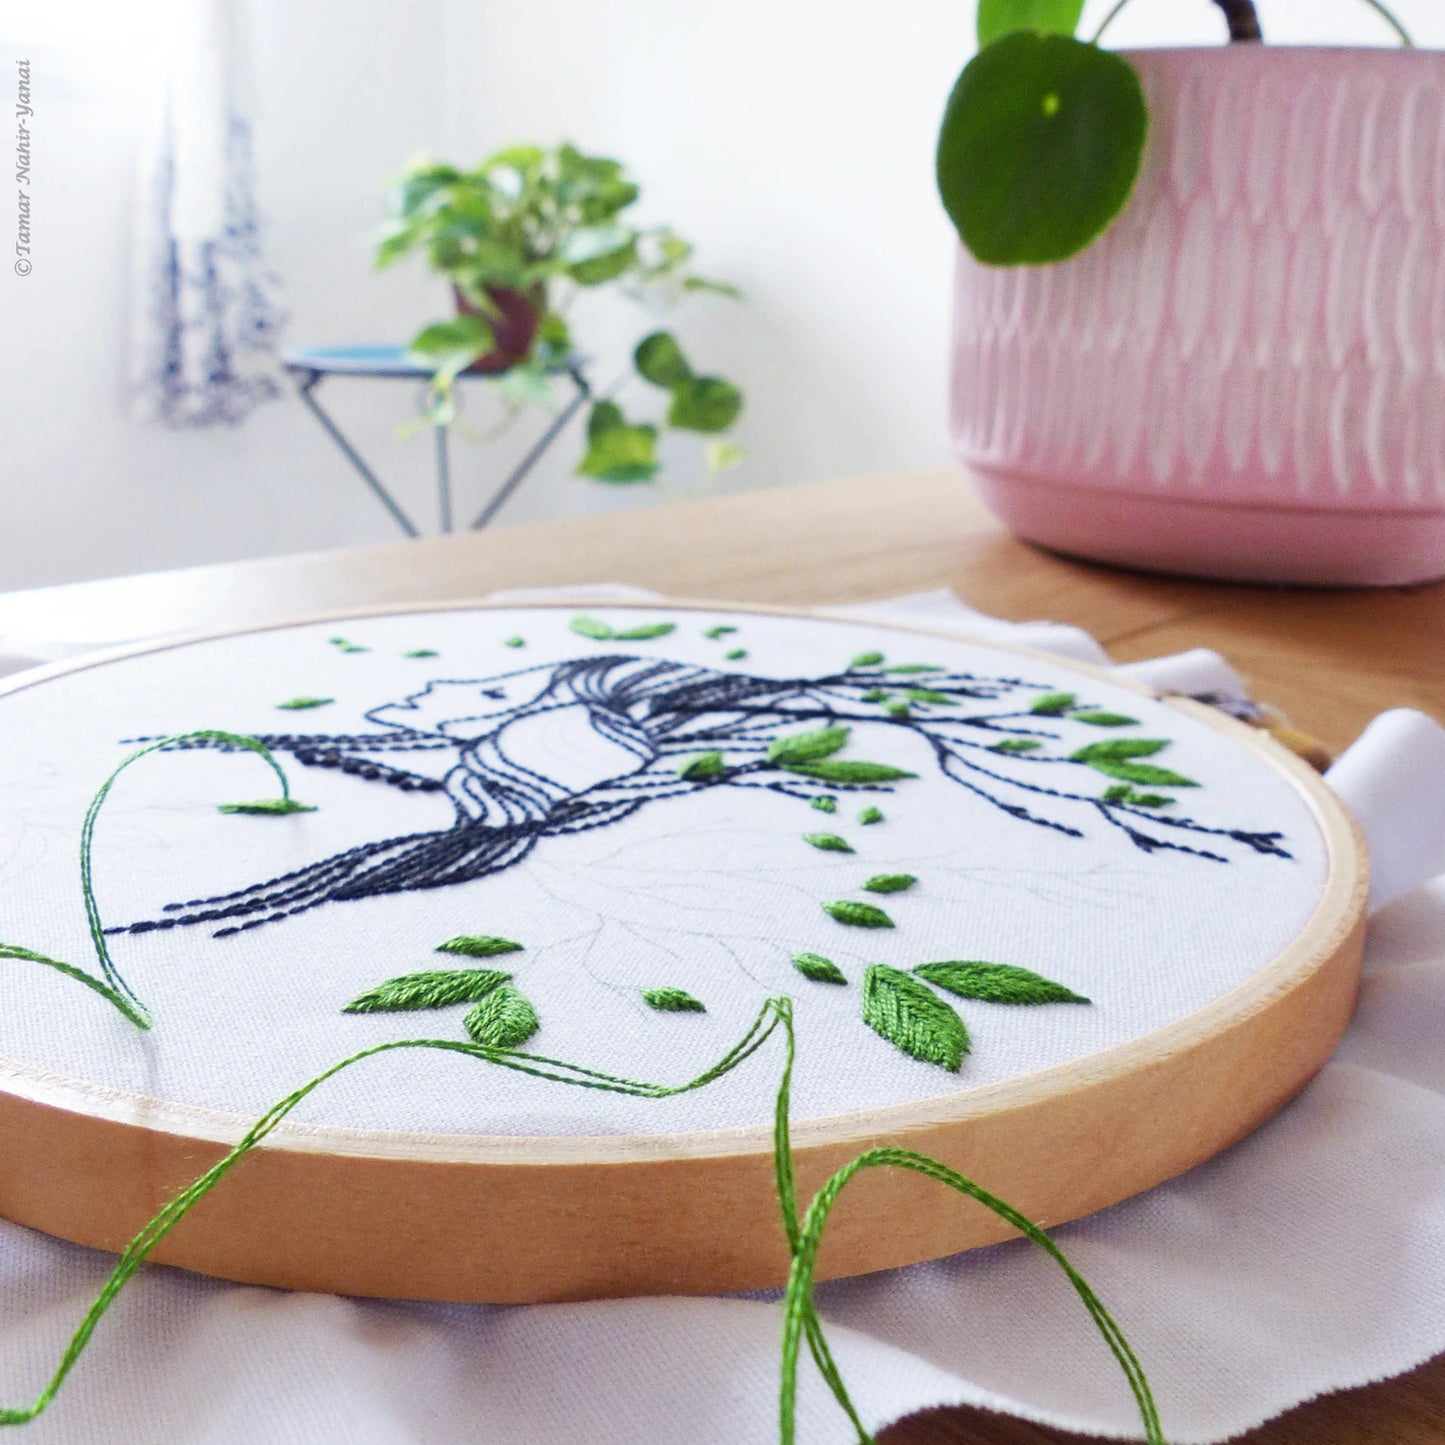 Forest Girl embroidery kit